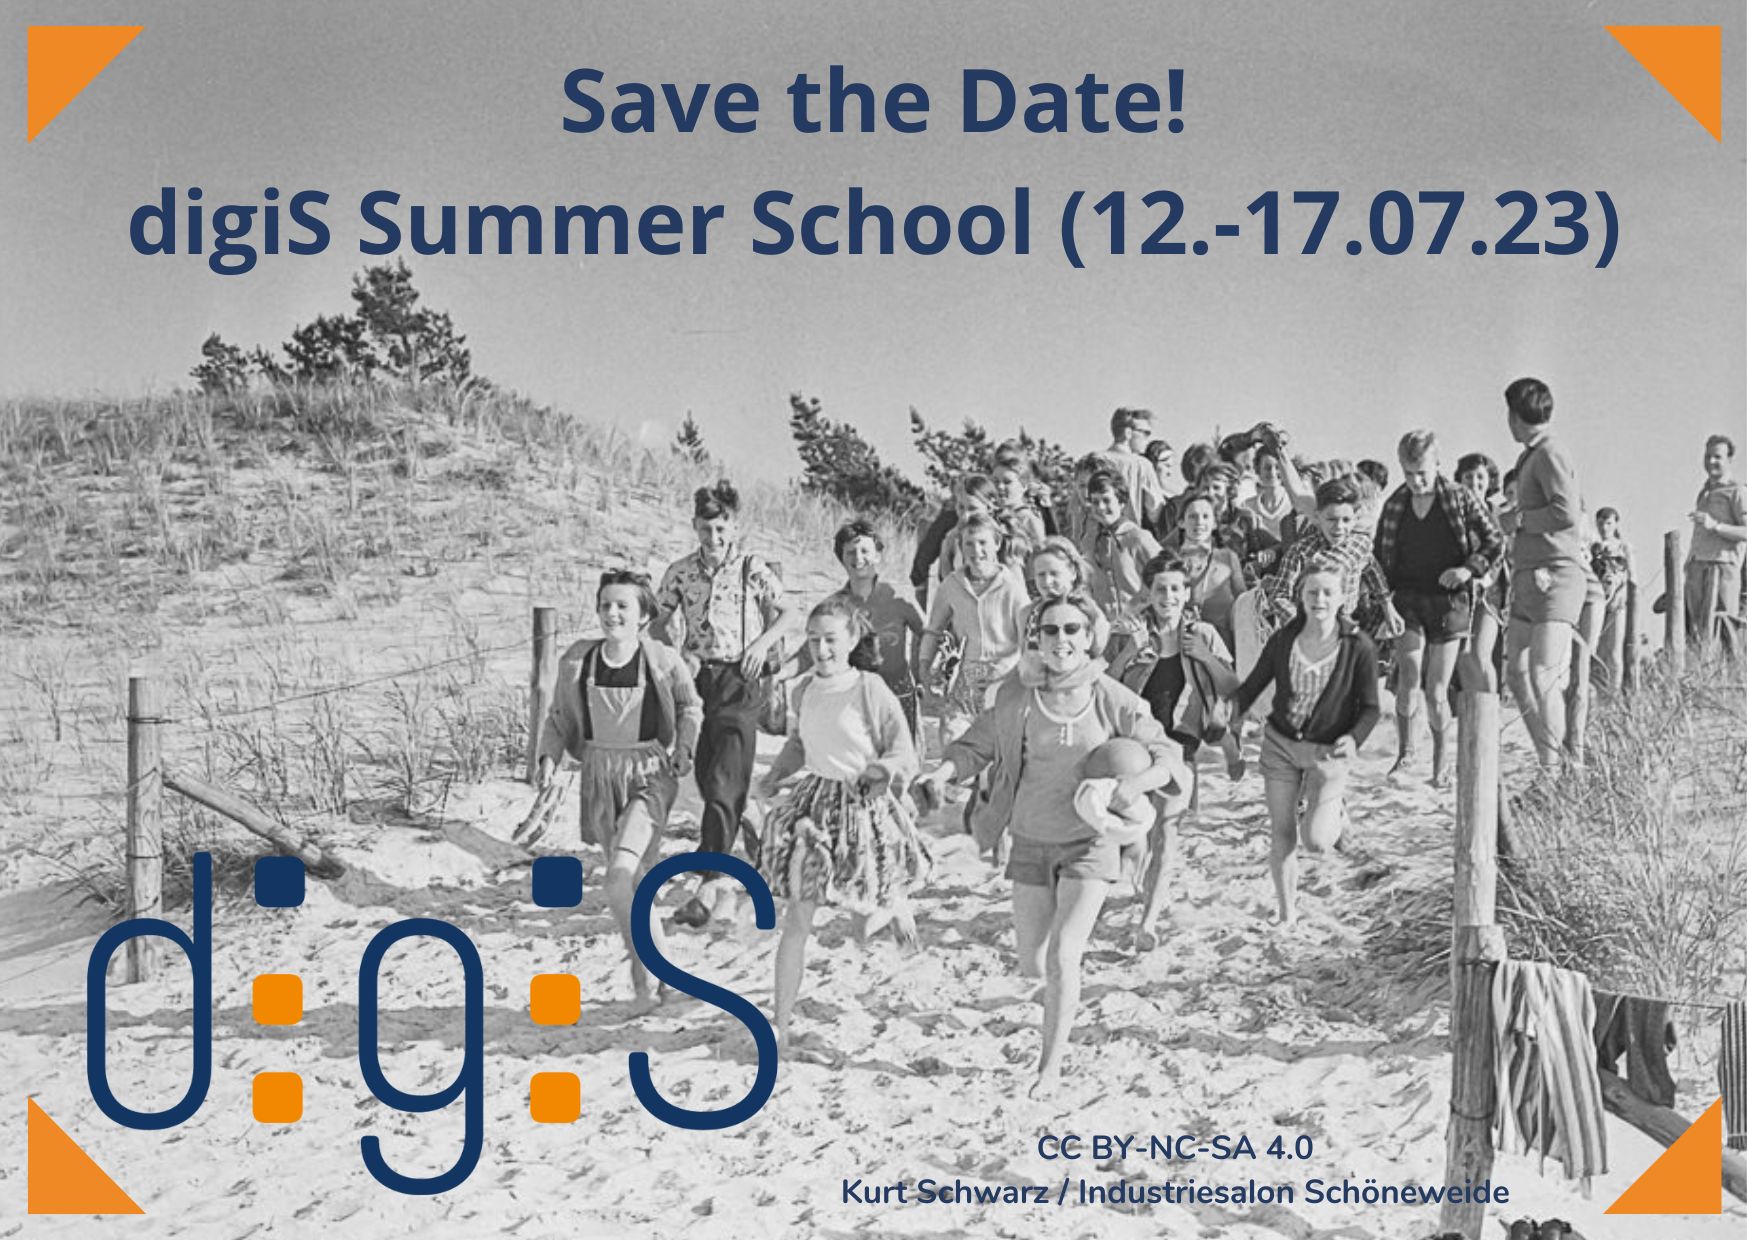 Save the Date: digiS Summer School (12.-17.07.23)